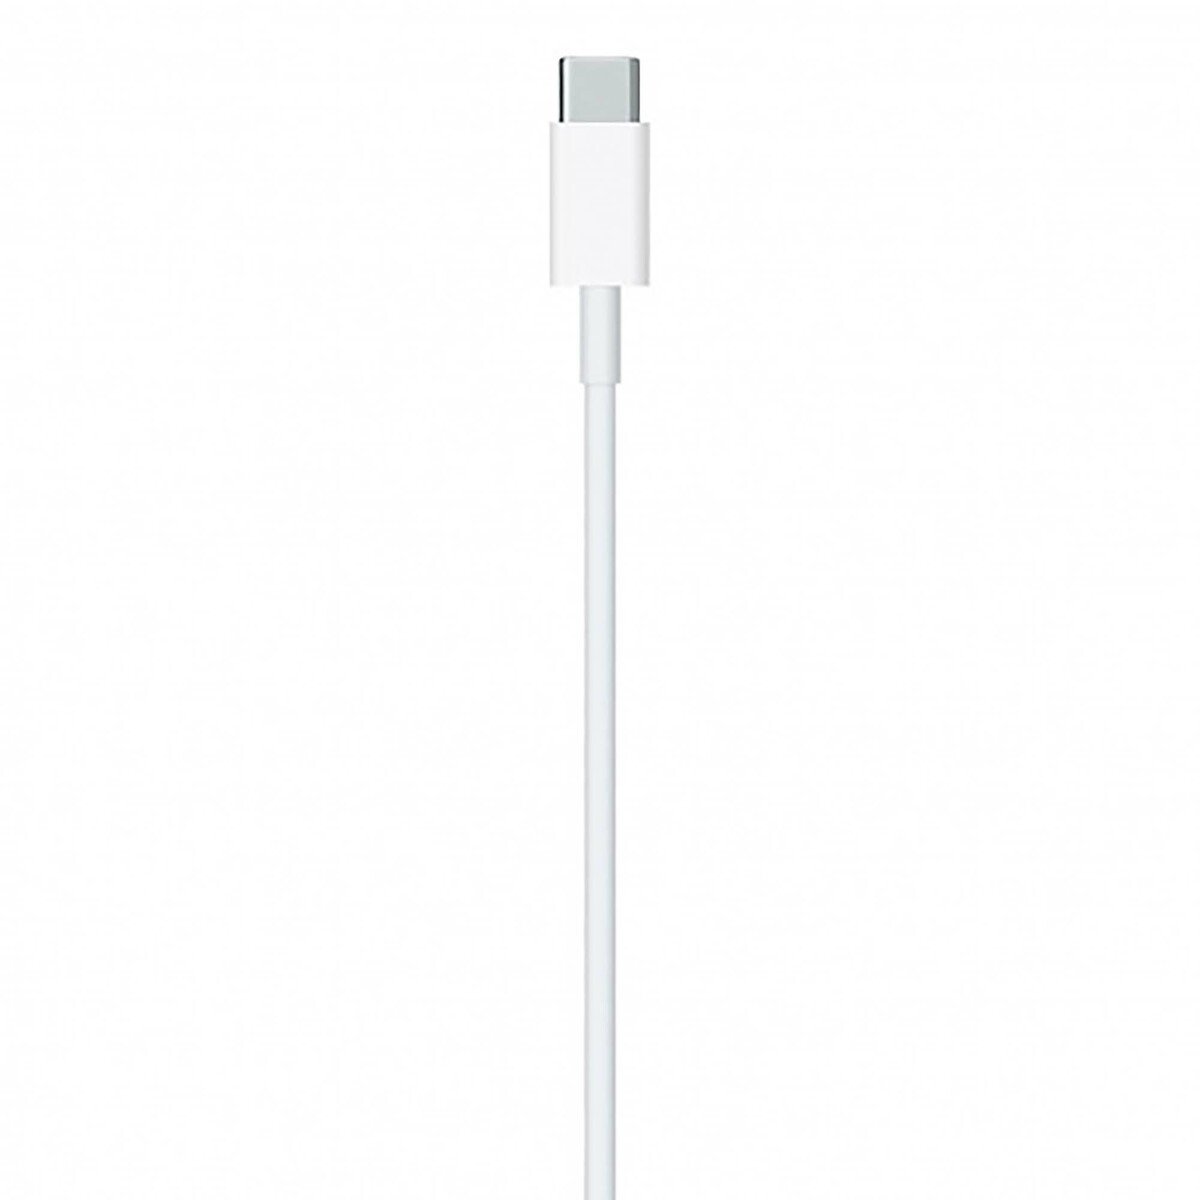 Apple USB-C to Lightning Cable MX0K2 1-Meter